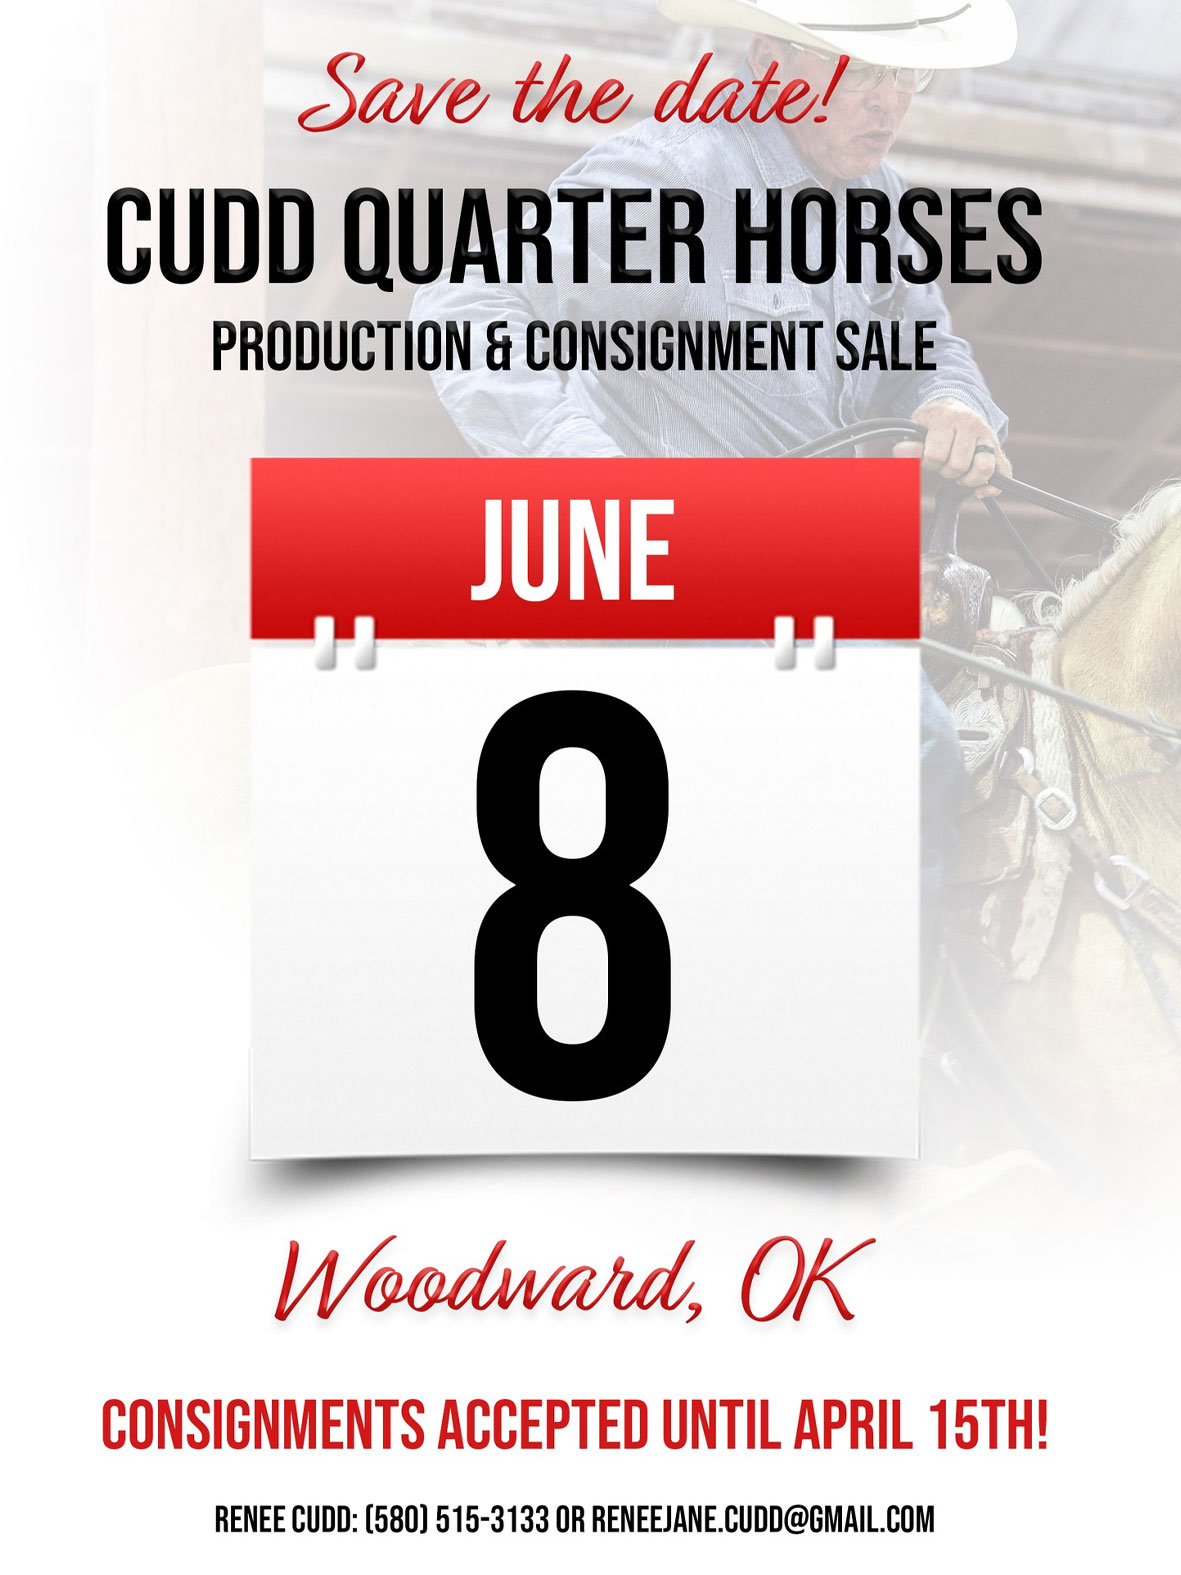 Event Ad for Cudd Quarter Horses Production Sale